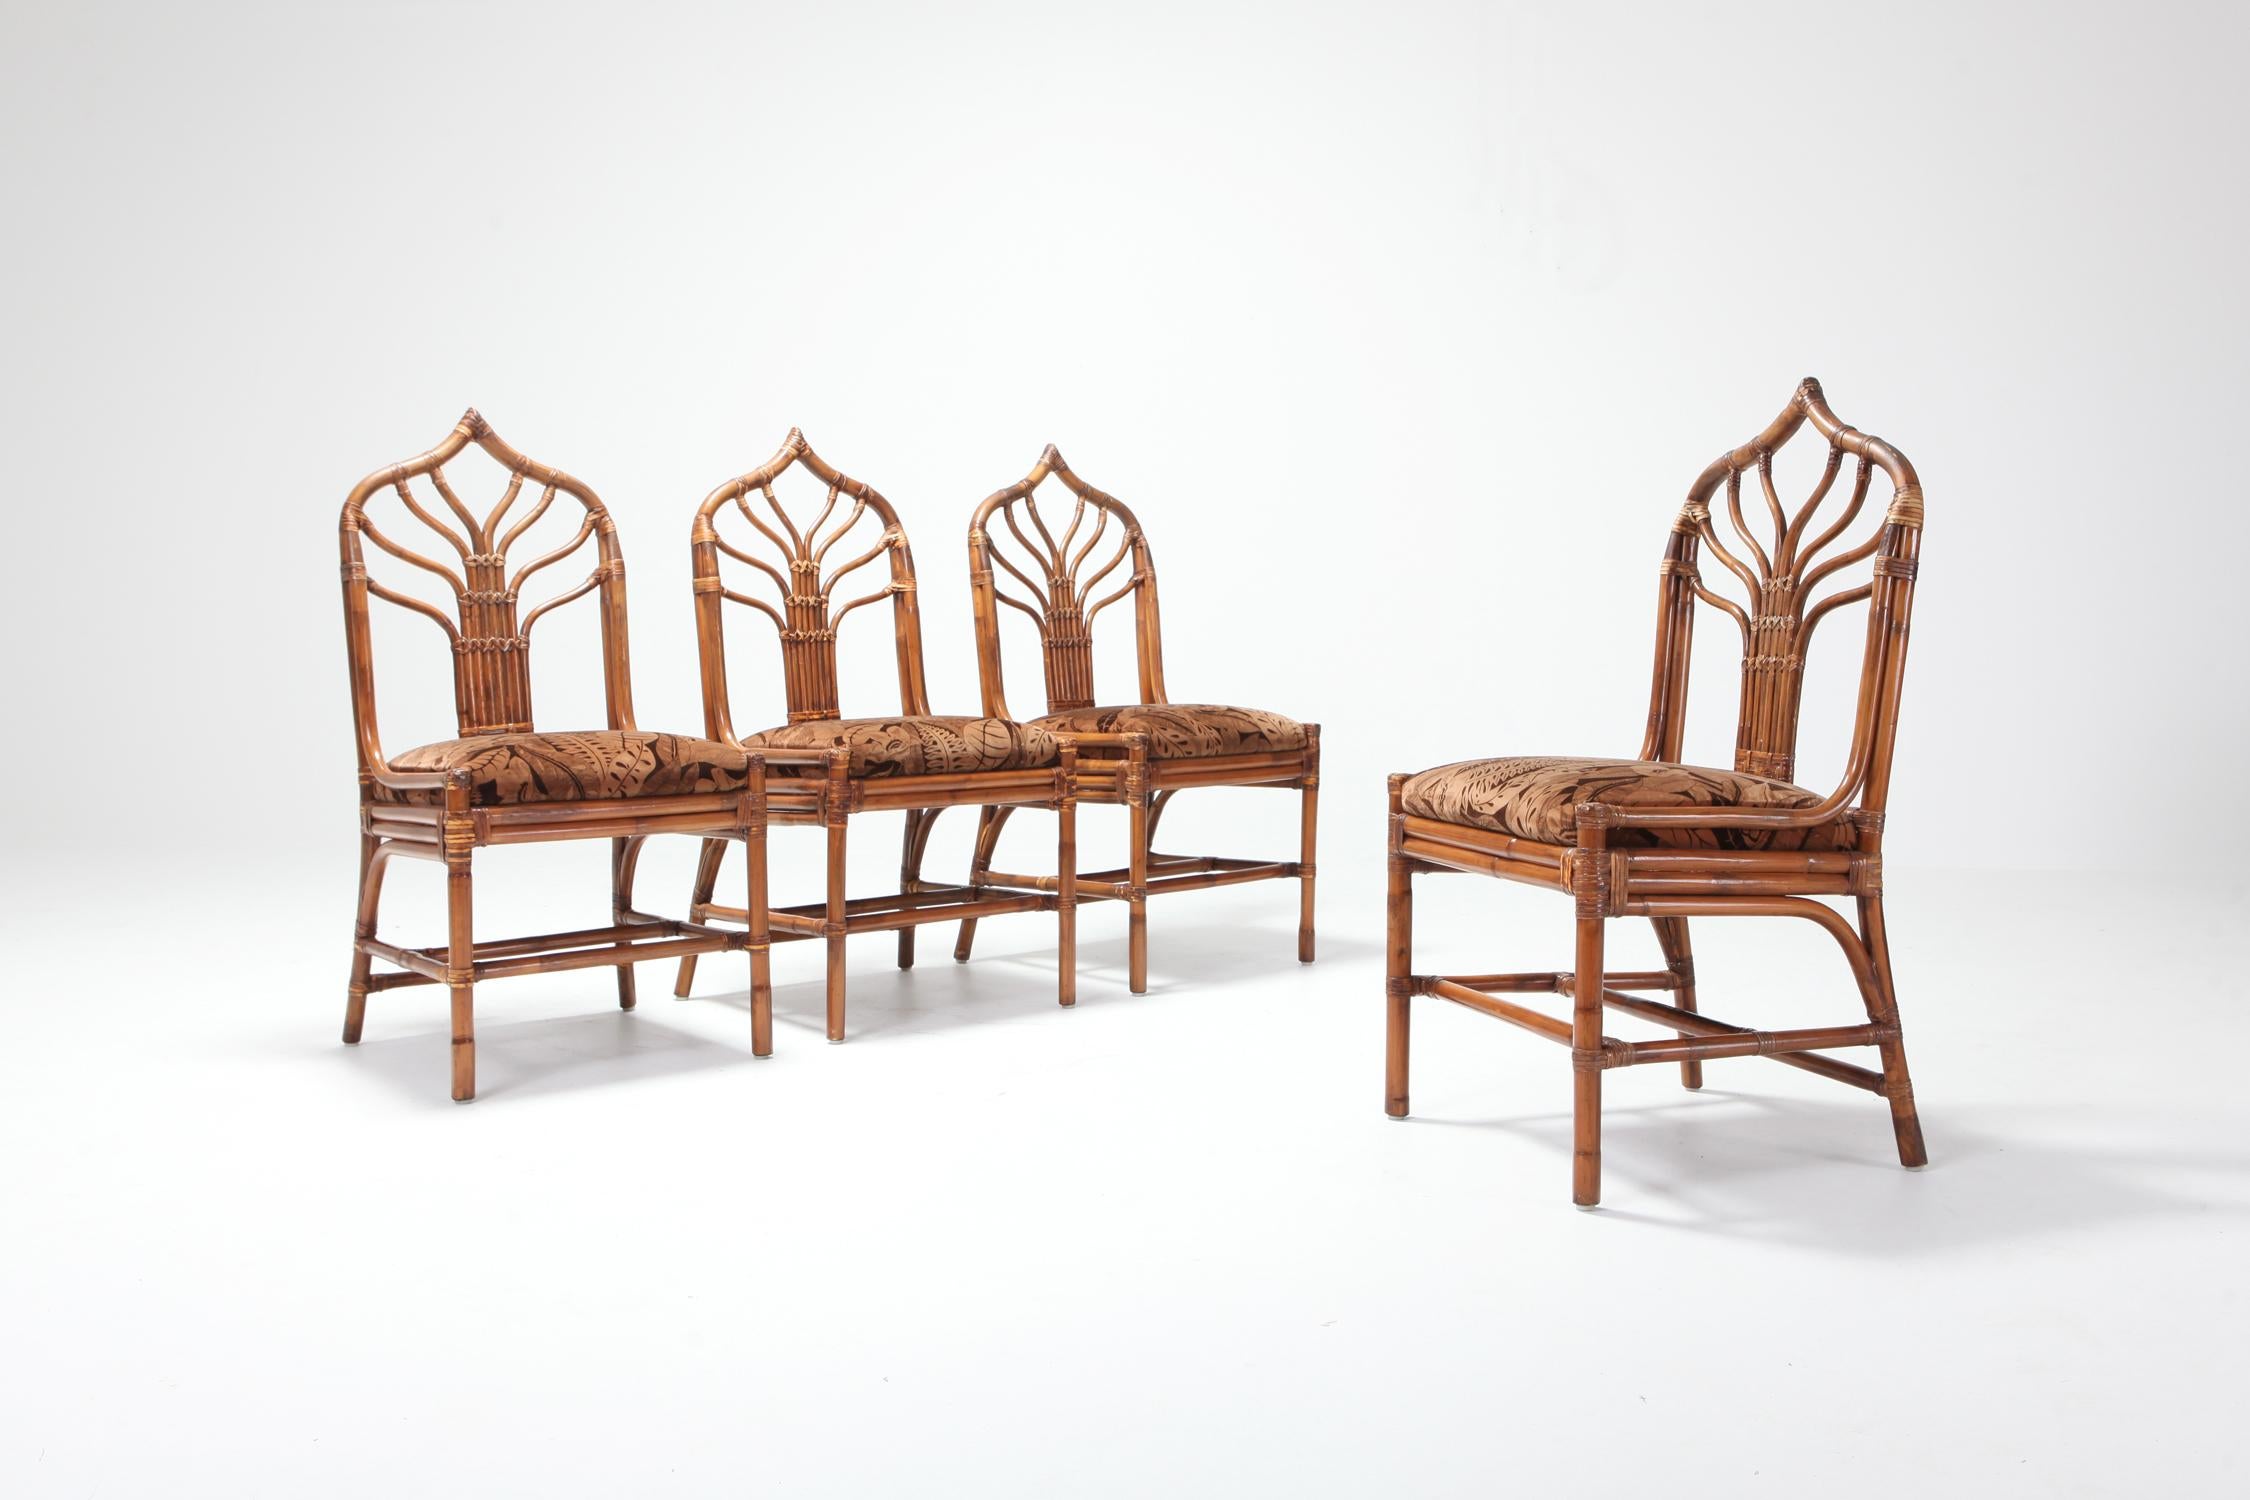 Italian Bamboo Dining Chairs from 1970s, Italy